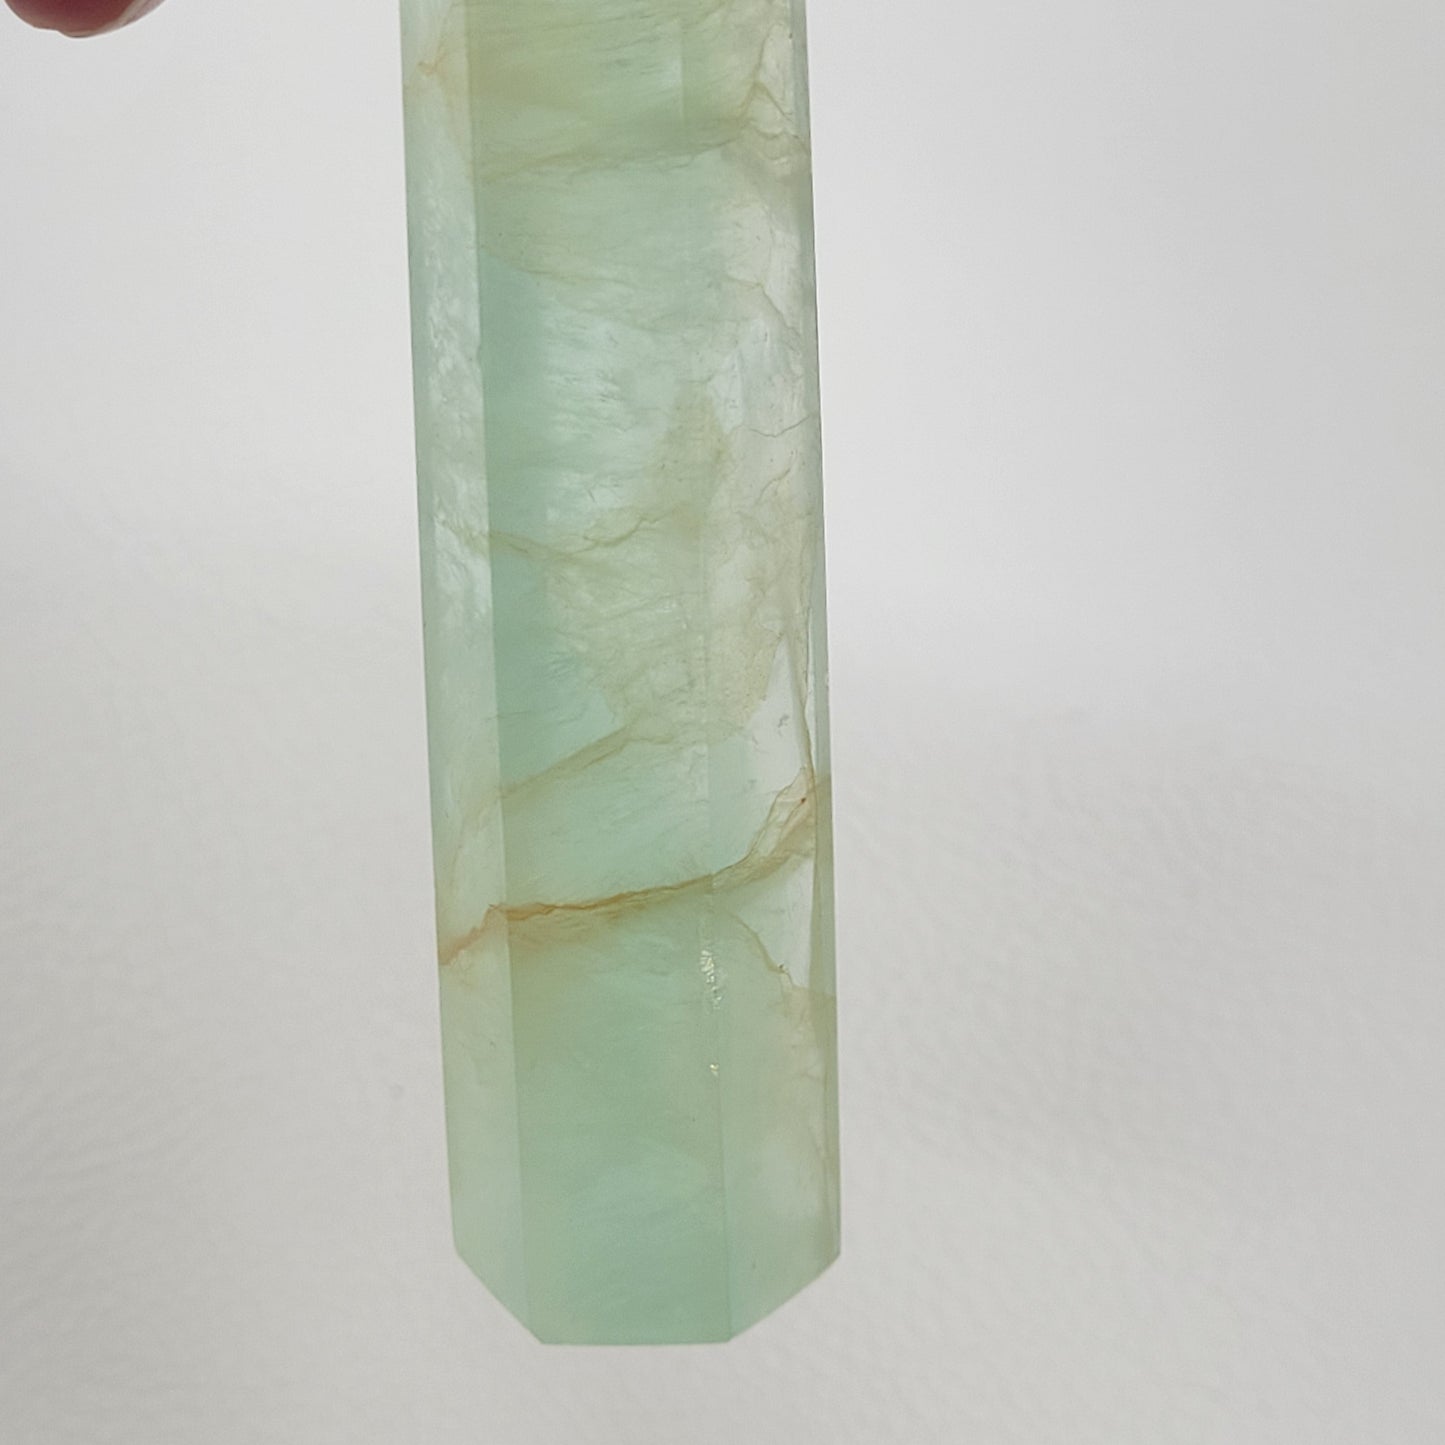 Green Fluorite w/ inclusion towers